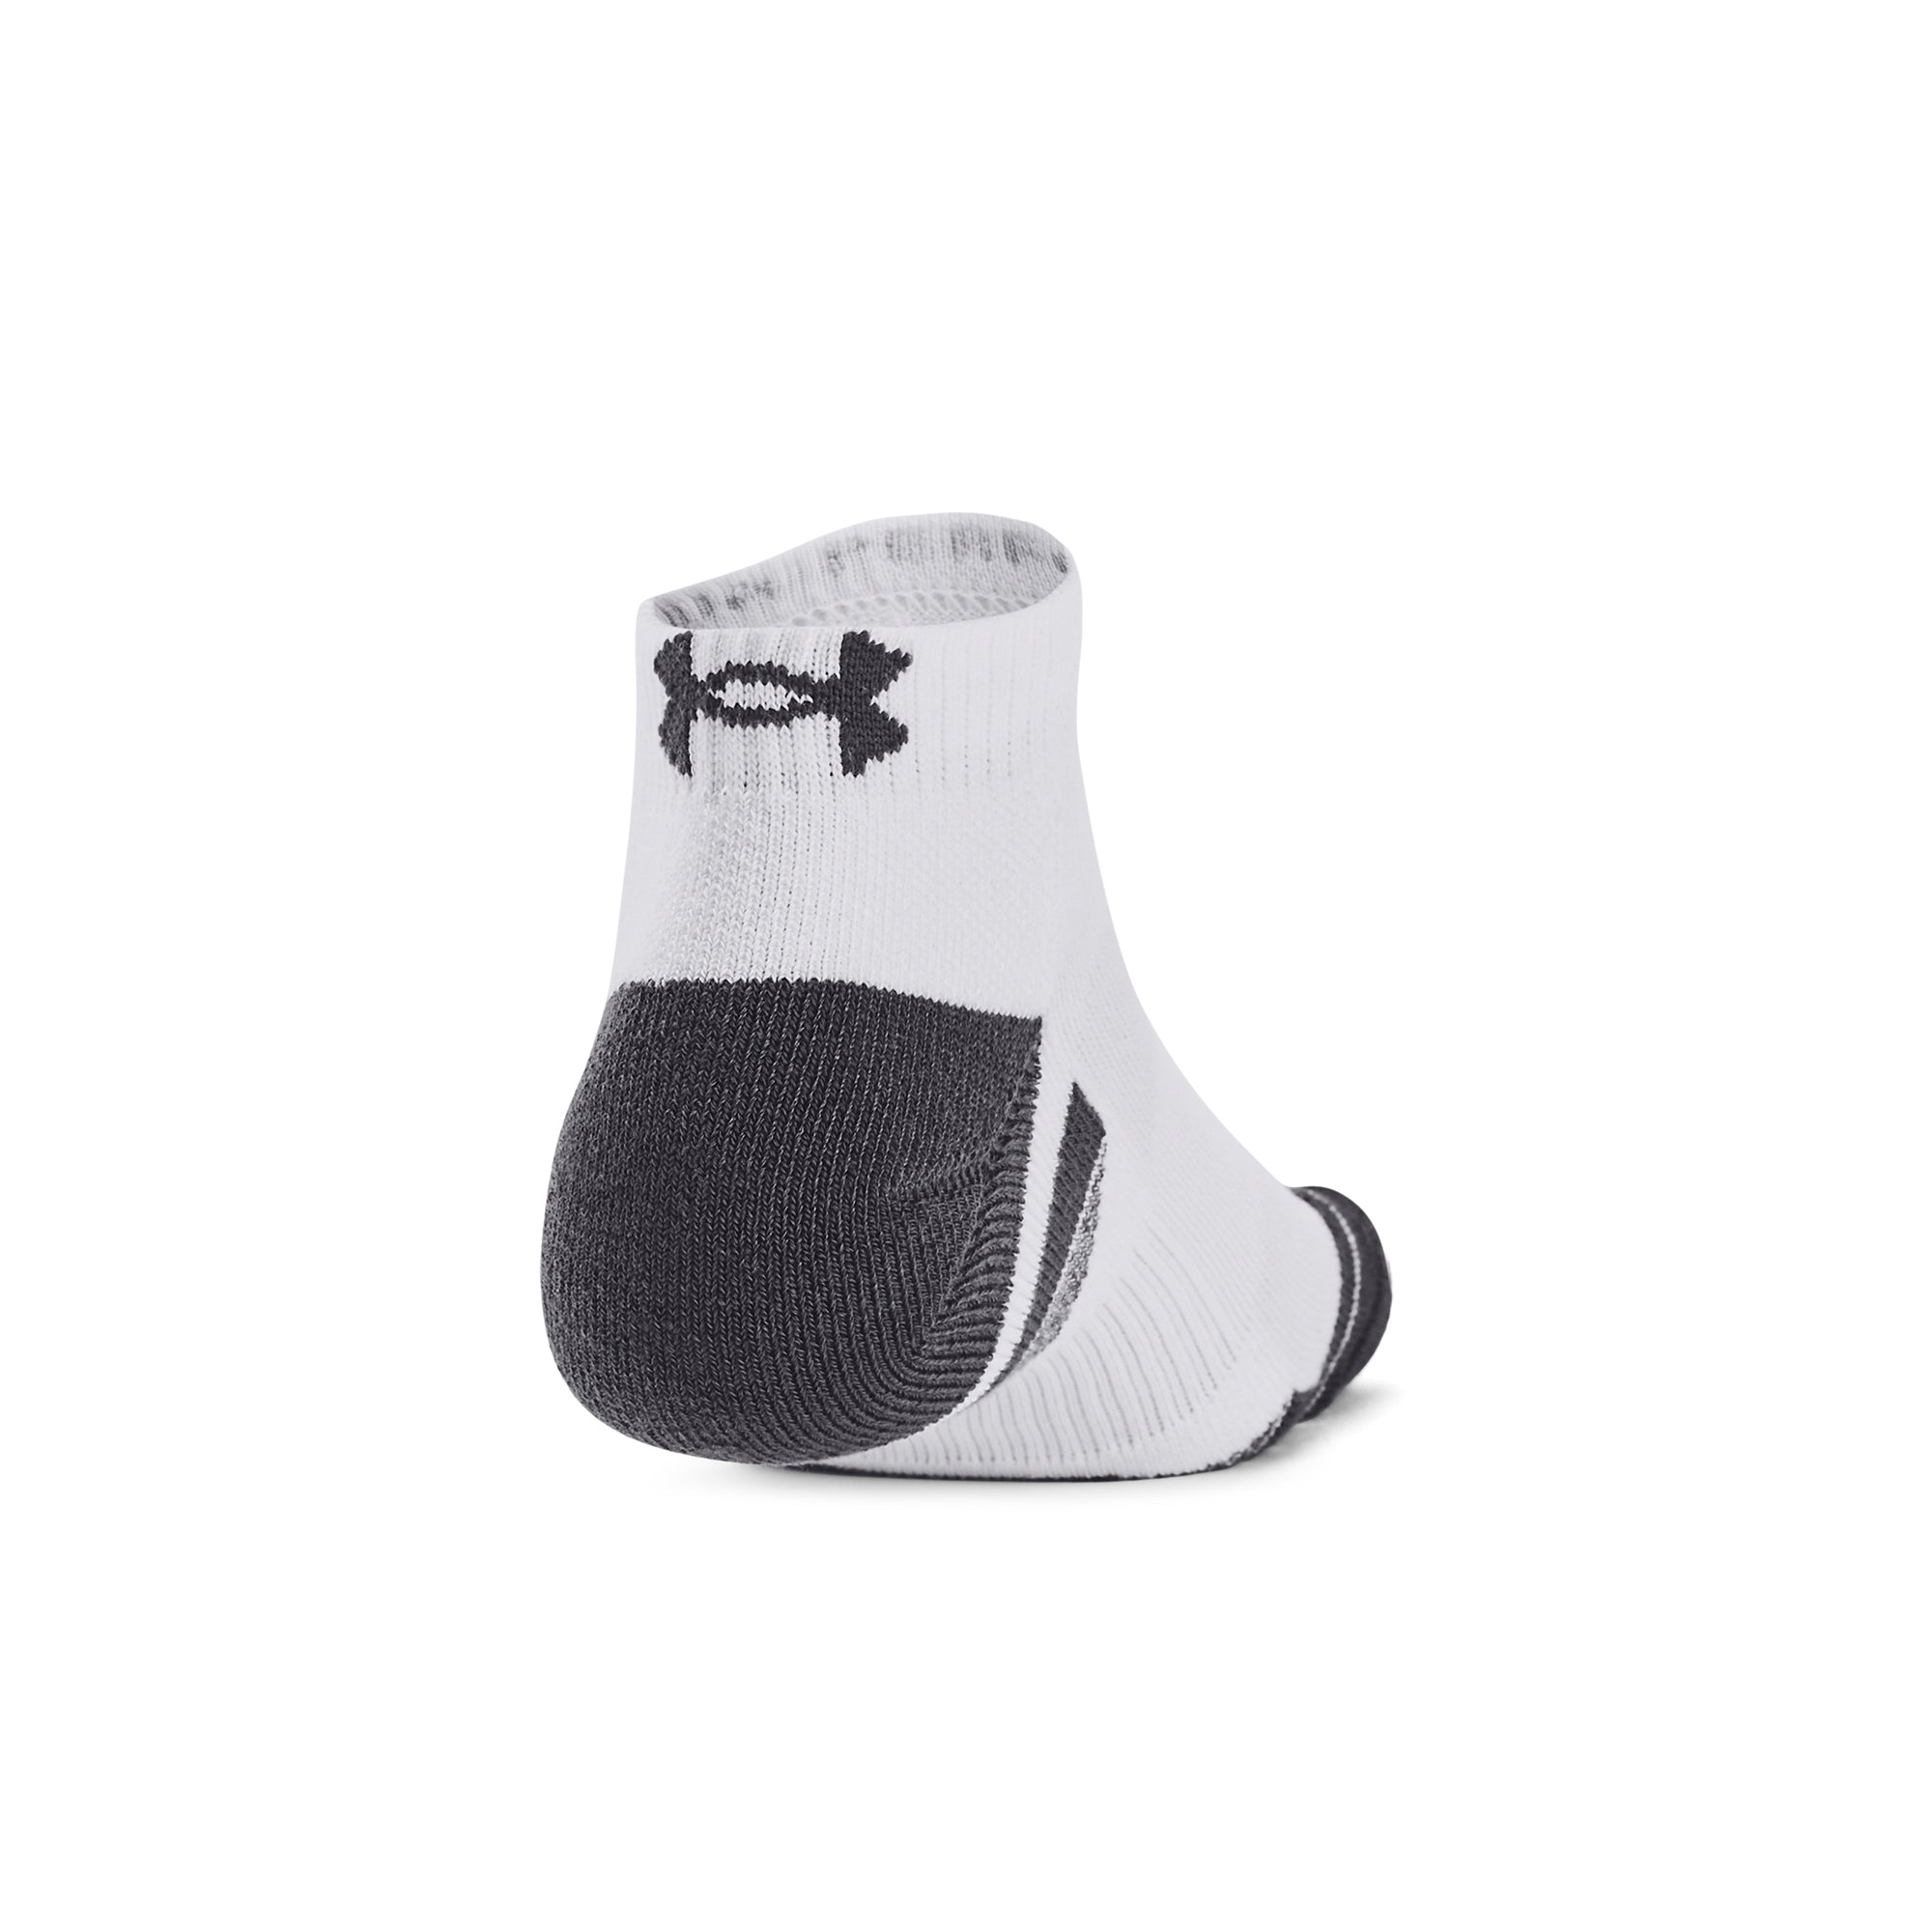 Under Armour Golf Performance Tech Low Sock - 3 Pack 1379504 White 100 ...